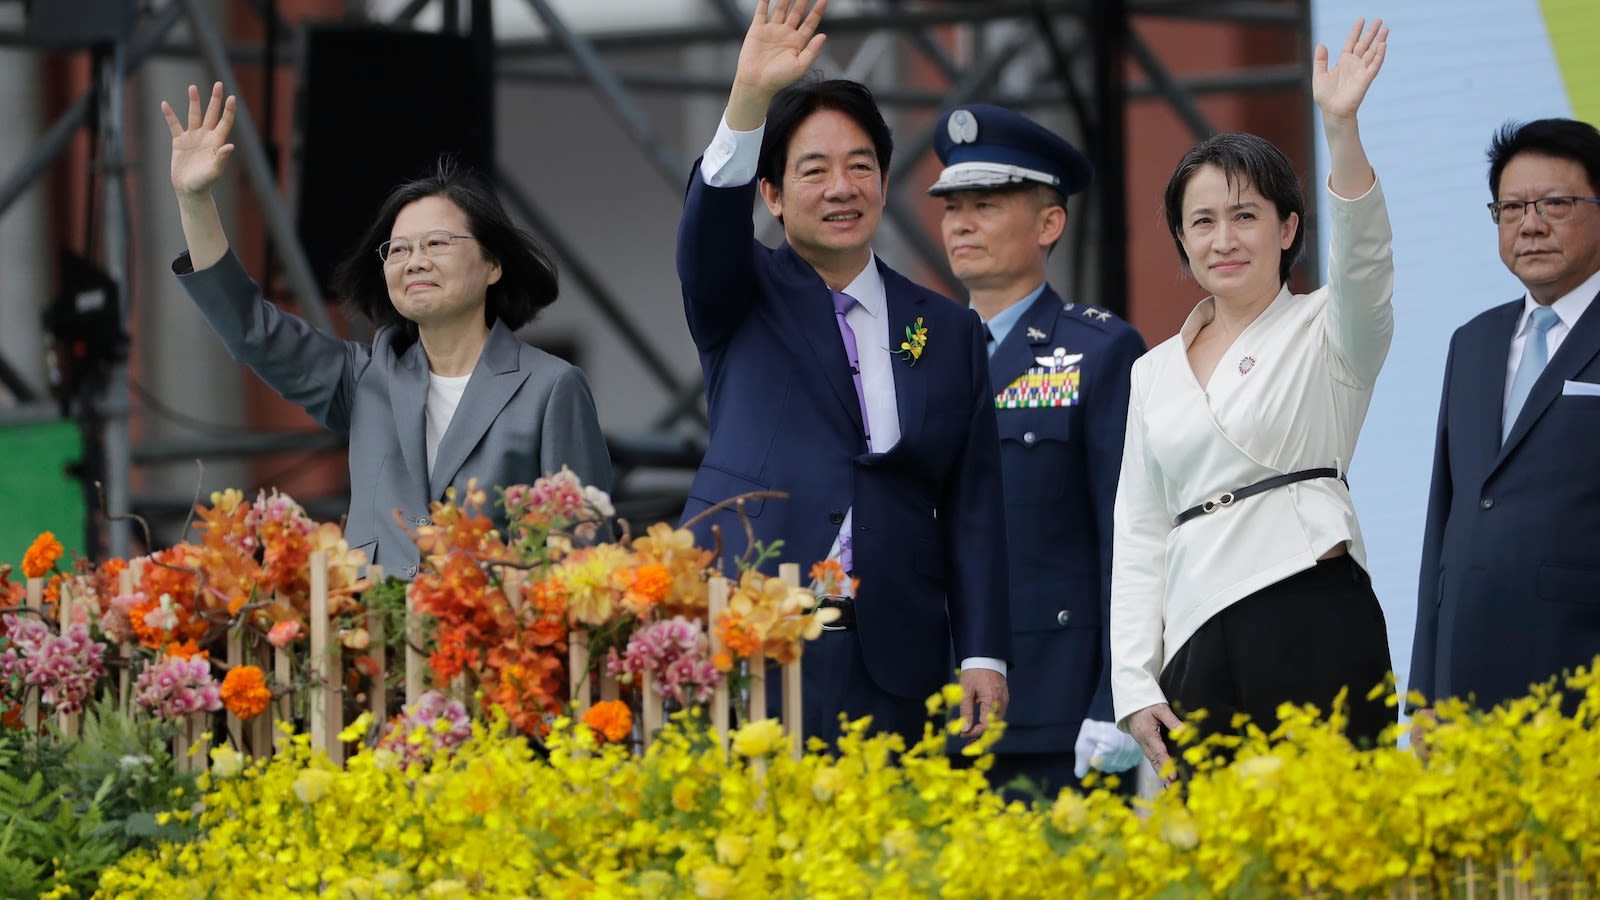 Lai Ching-te inaugurated as Taiwan's president, likely to bolster island's US ties